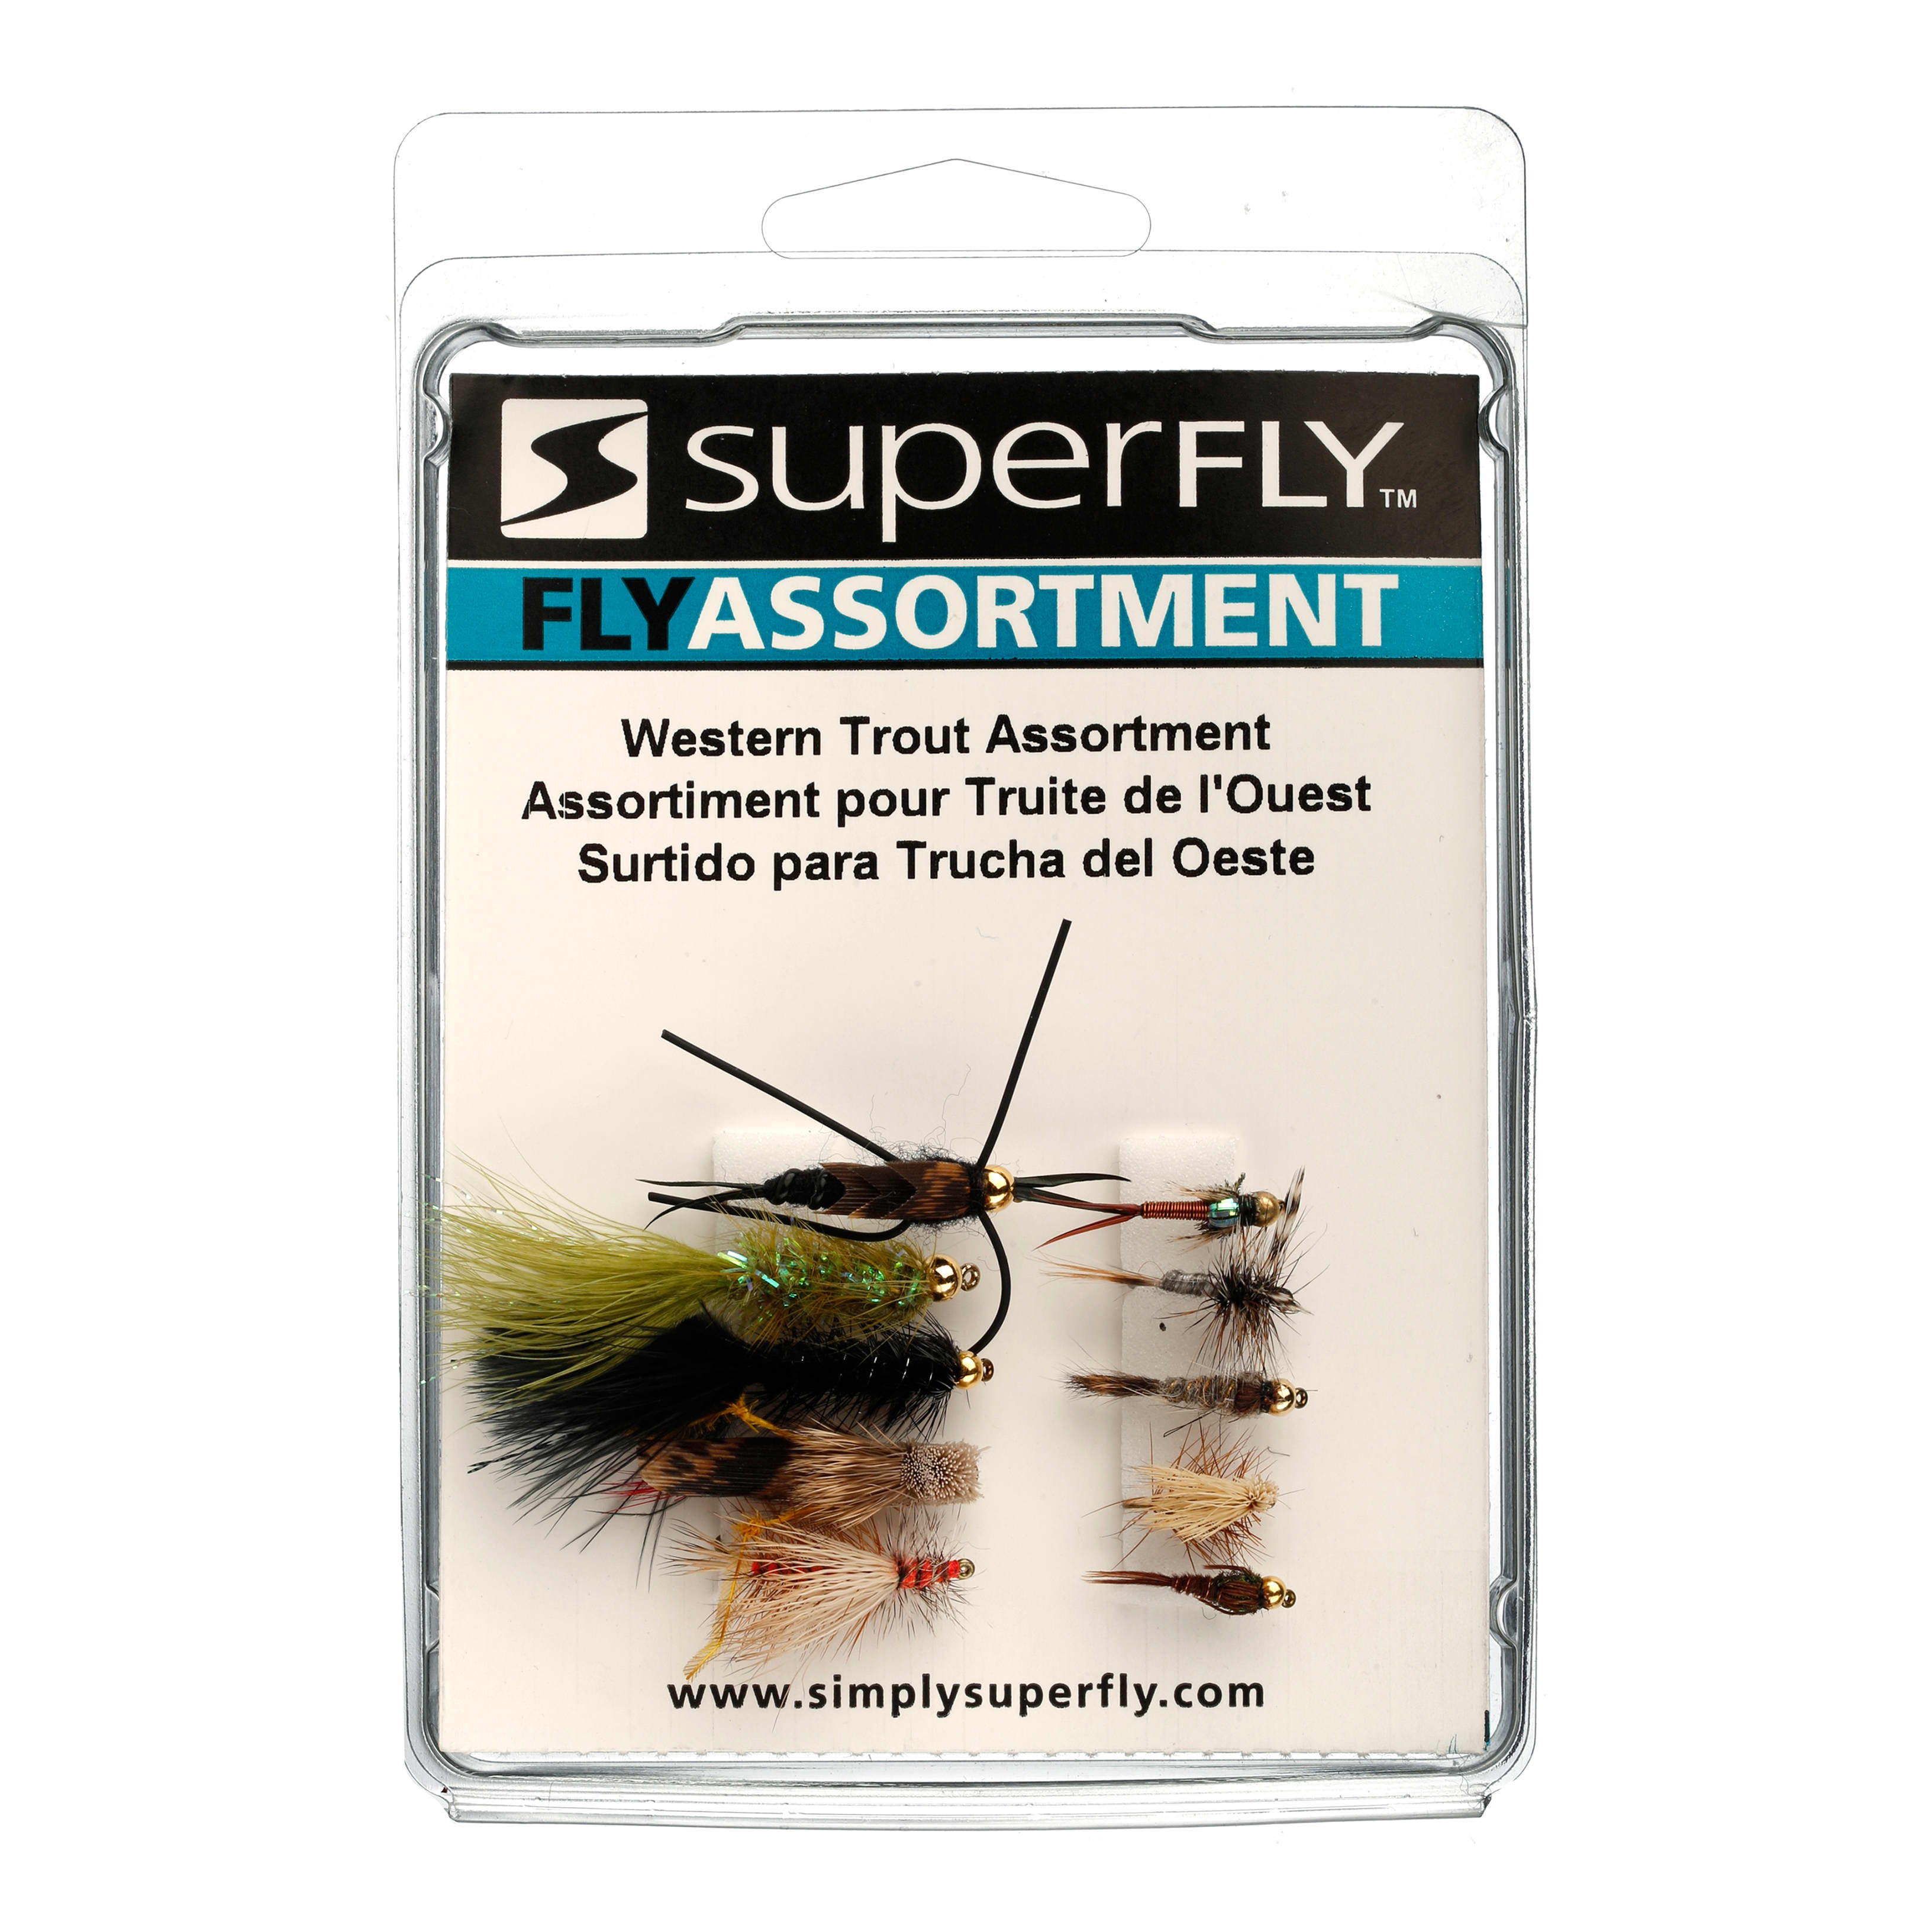 Superfly Premium Western Trout Selection